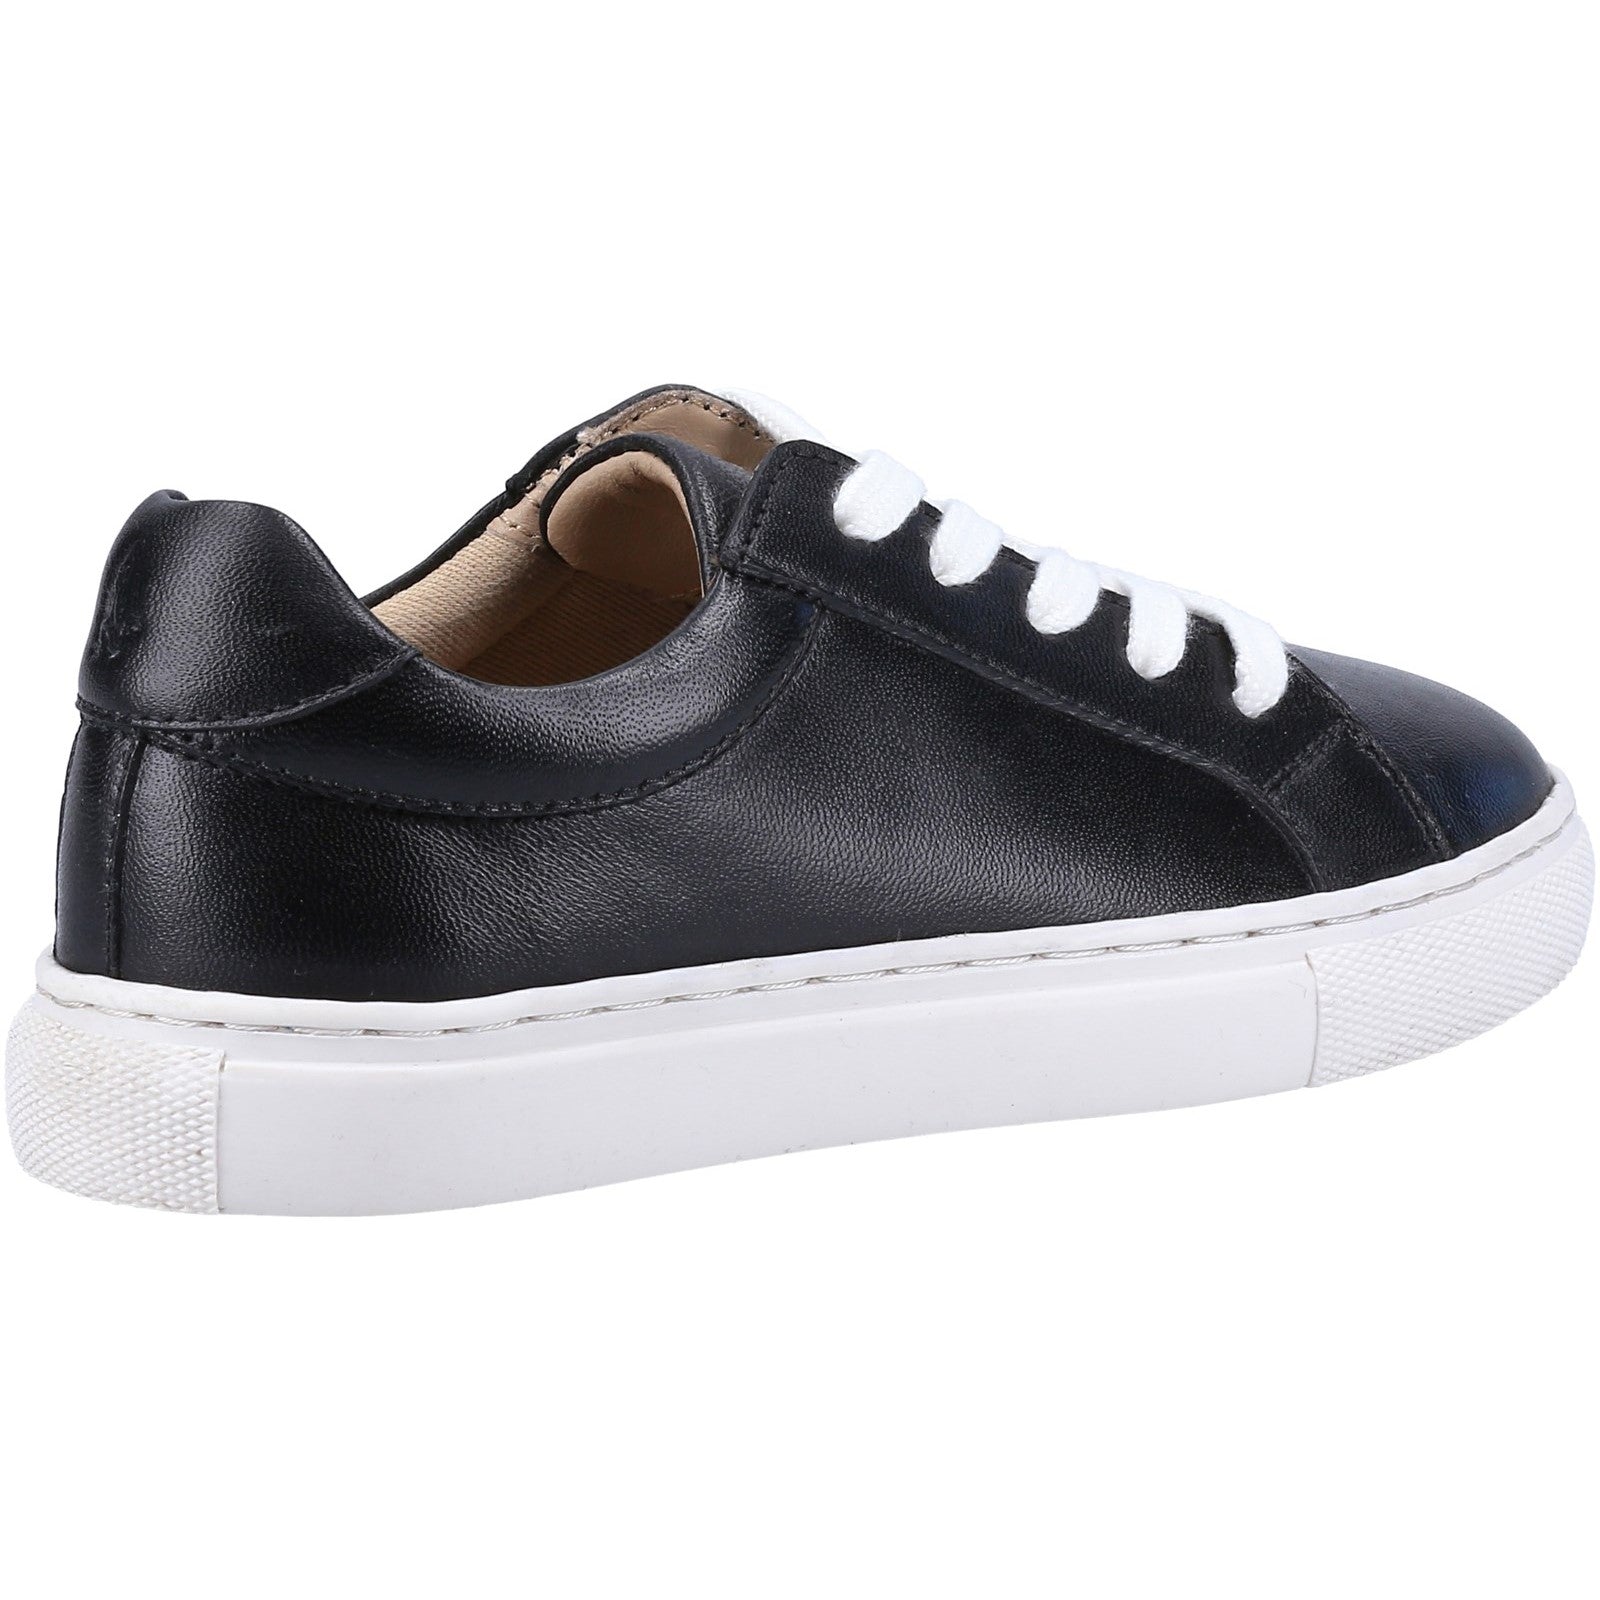 Hush Puppies Boys Colton Leather Trainers - Black